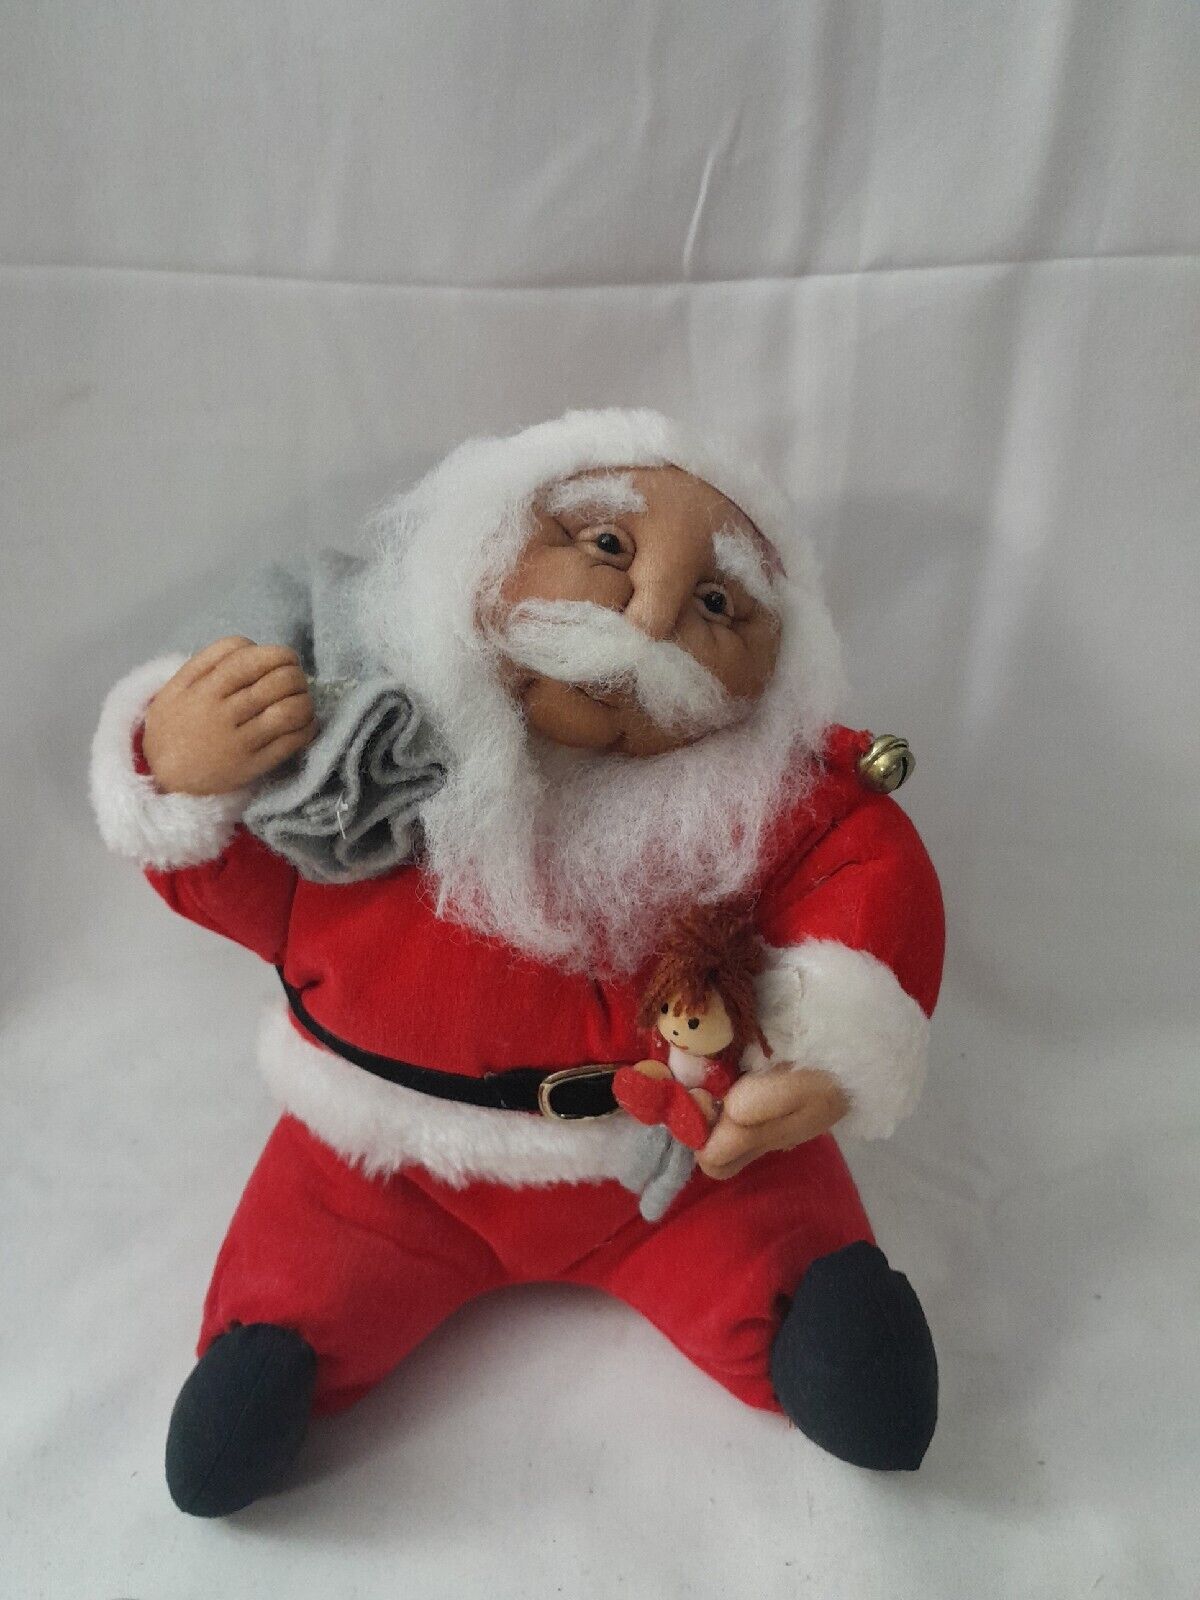 Handcrafted Soft Sculpture Emily Wilson Santa Plush Seated 1984 Vintage Rare 8in